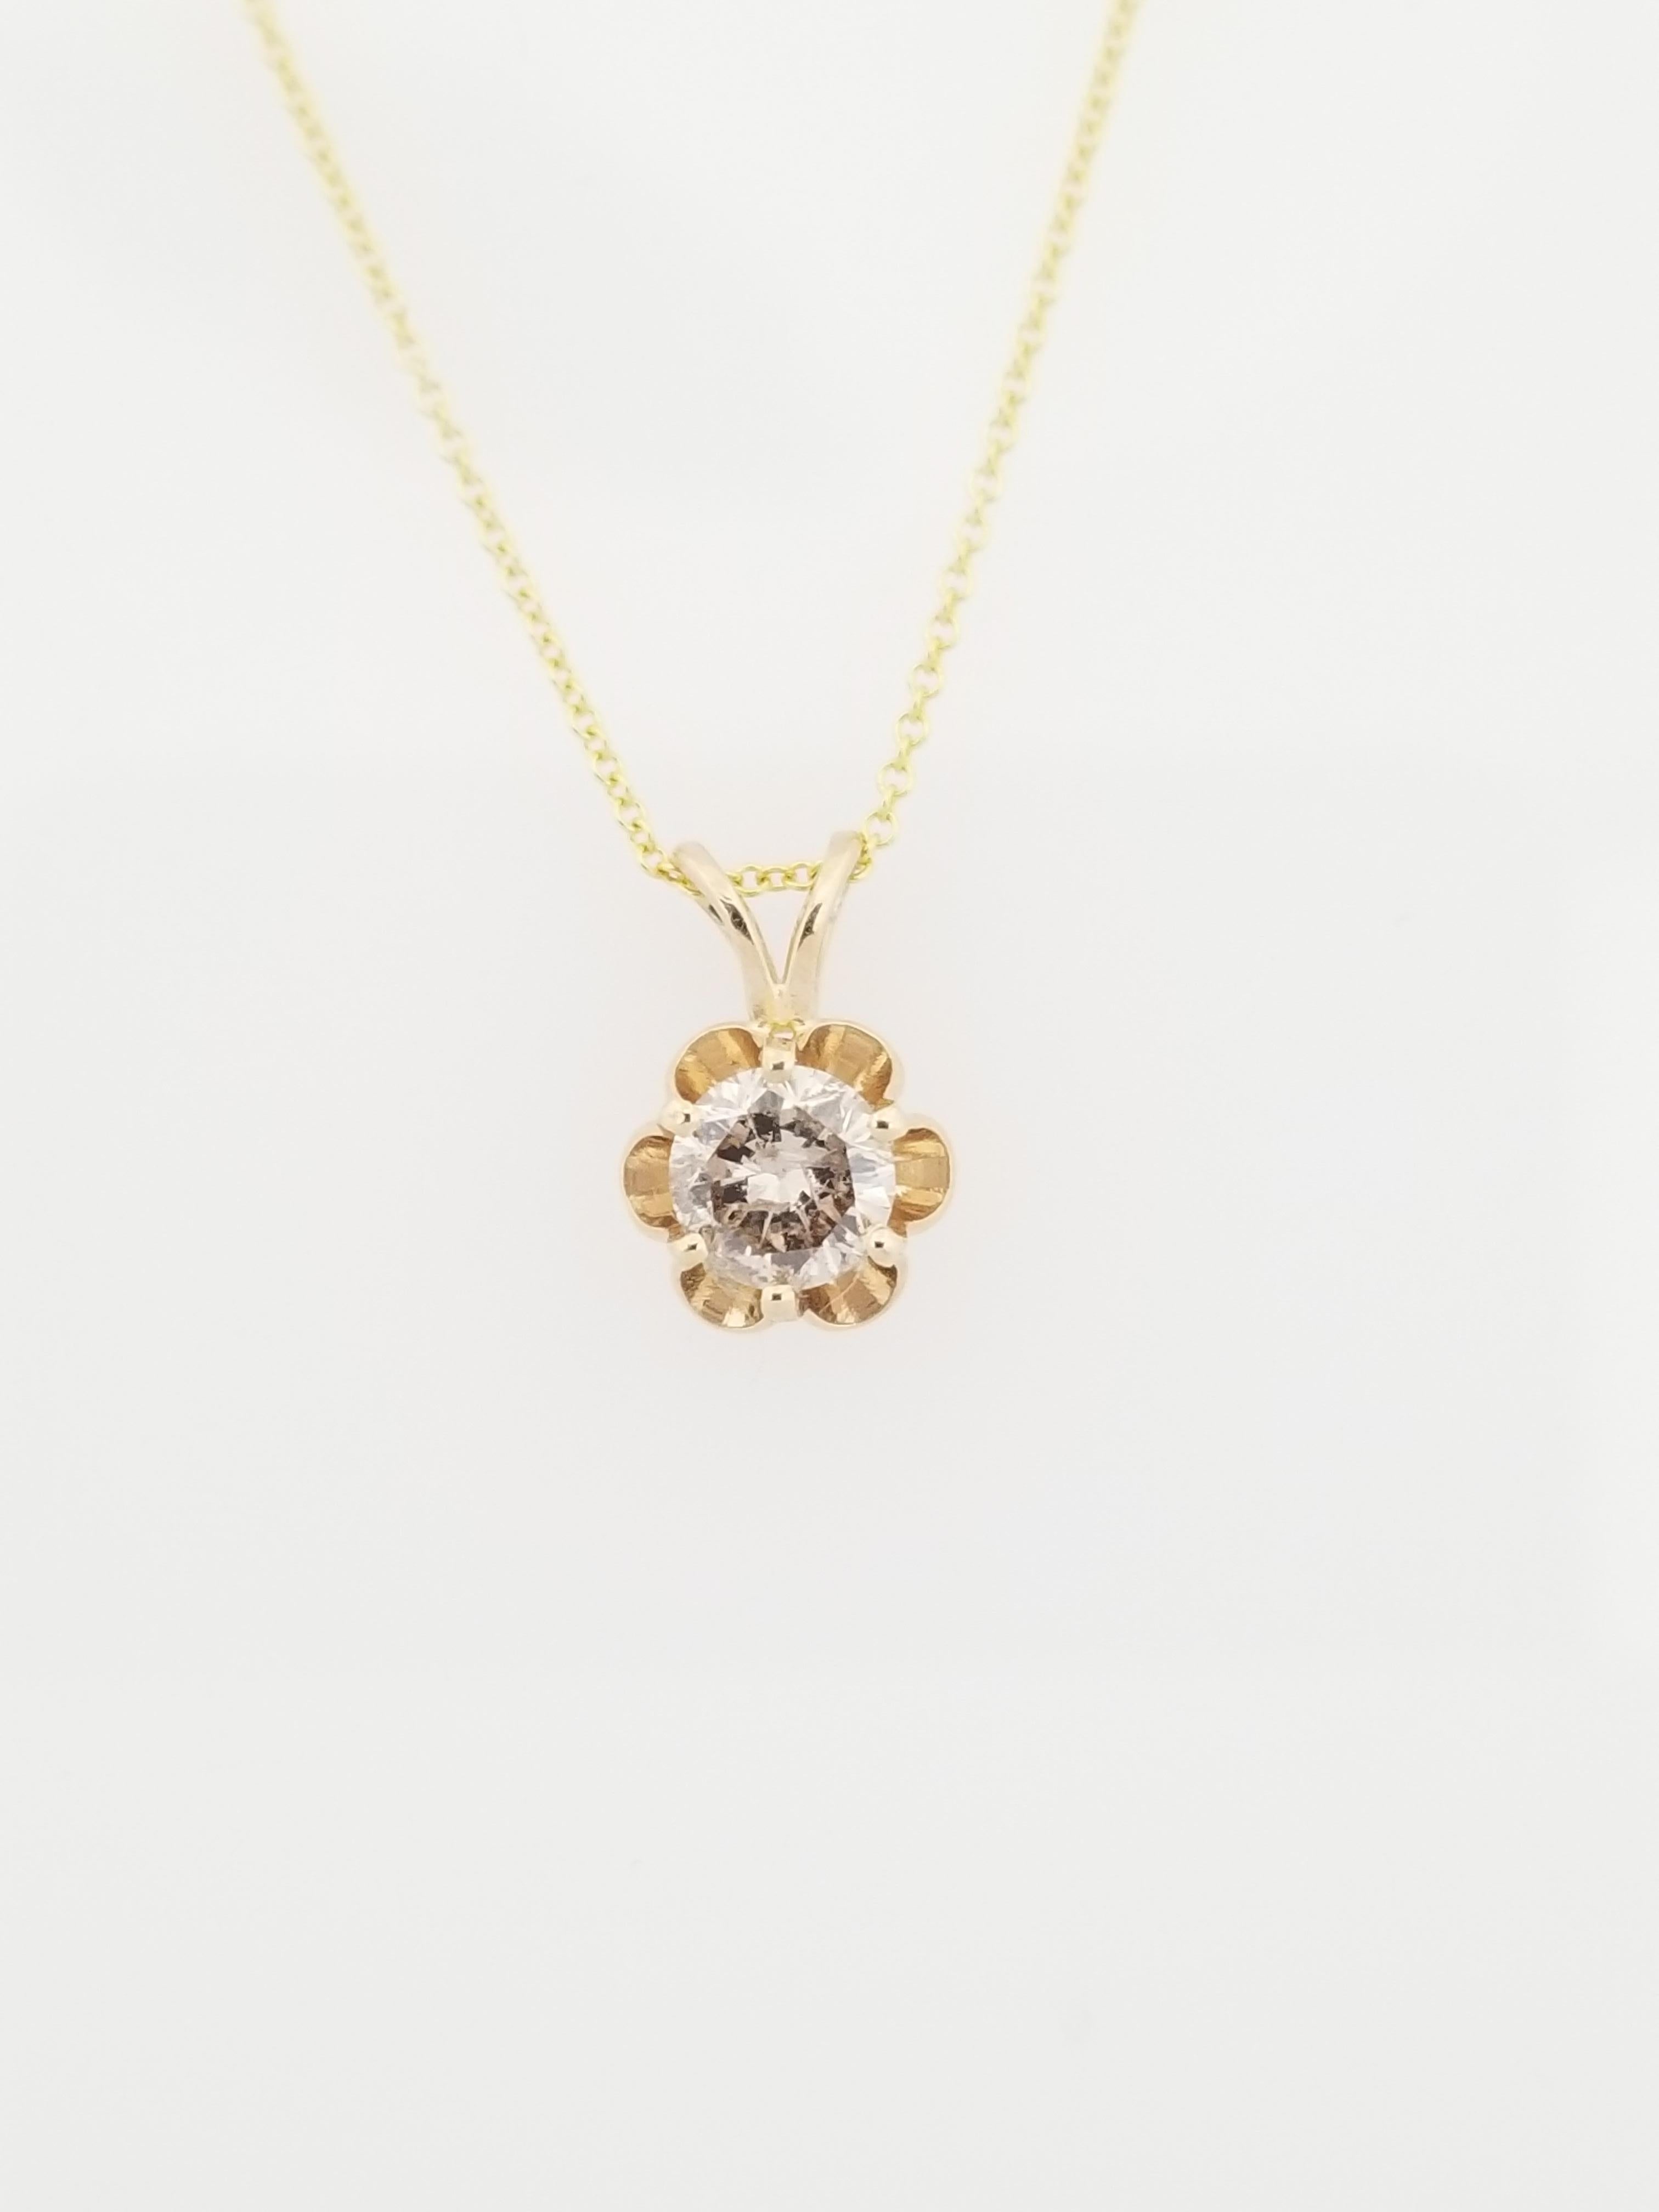 This gorgeous diamond pendant features a 0.56 carat round diamond solitaire set in a beautiful 14 karat yellow gold buttercup design. Pendant measures approximately 0.5 inch length and 0.25 inch wide. 

(Pendant Only - Chain sold separately)